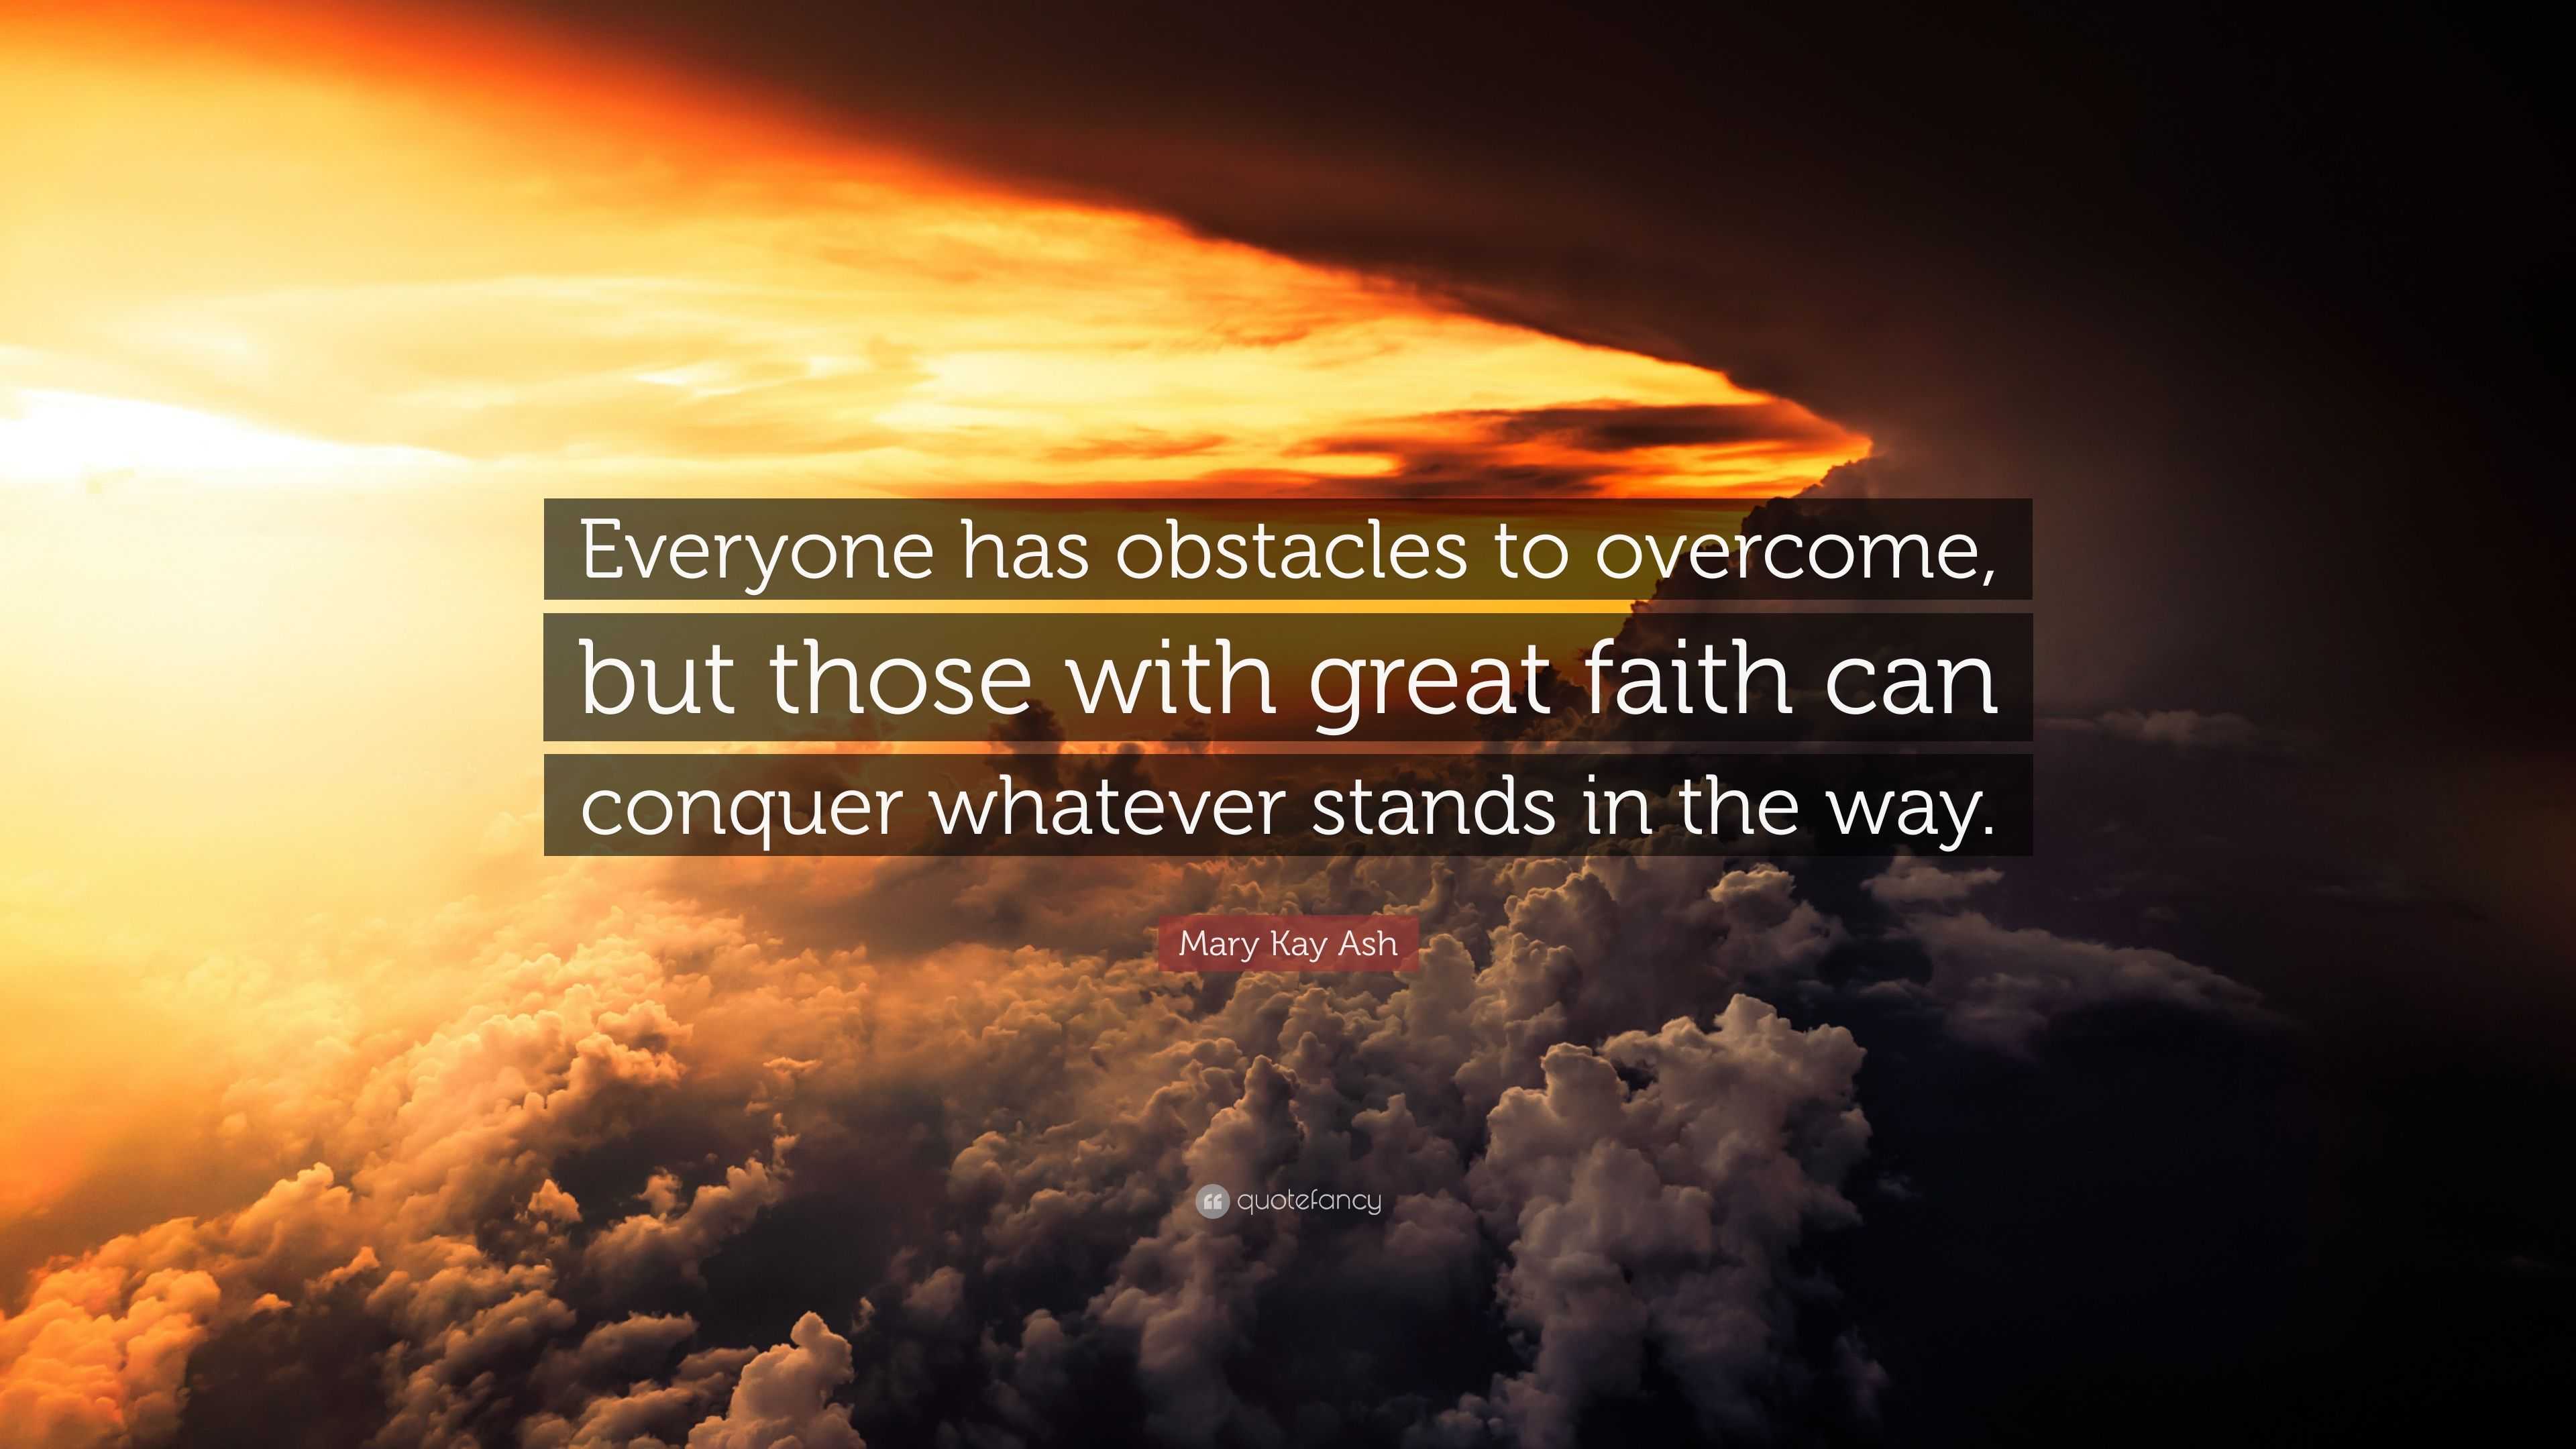 Mary Kay Ash Quote: “Everyone has obstacles to overcome, but those with